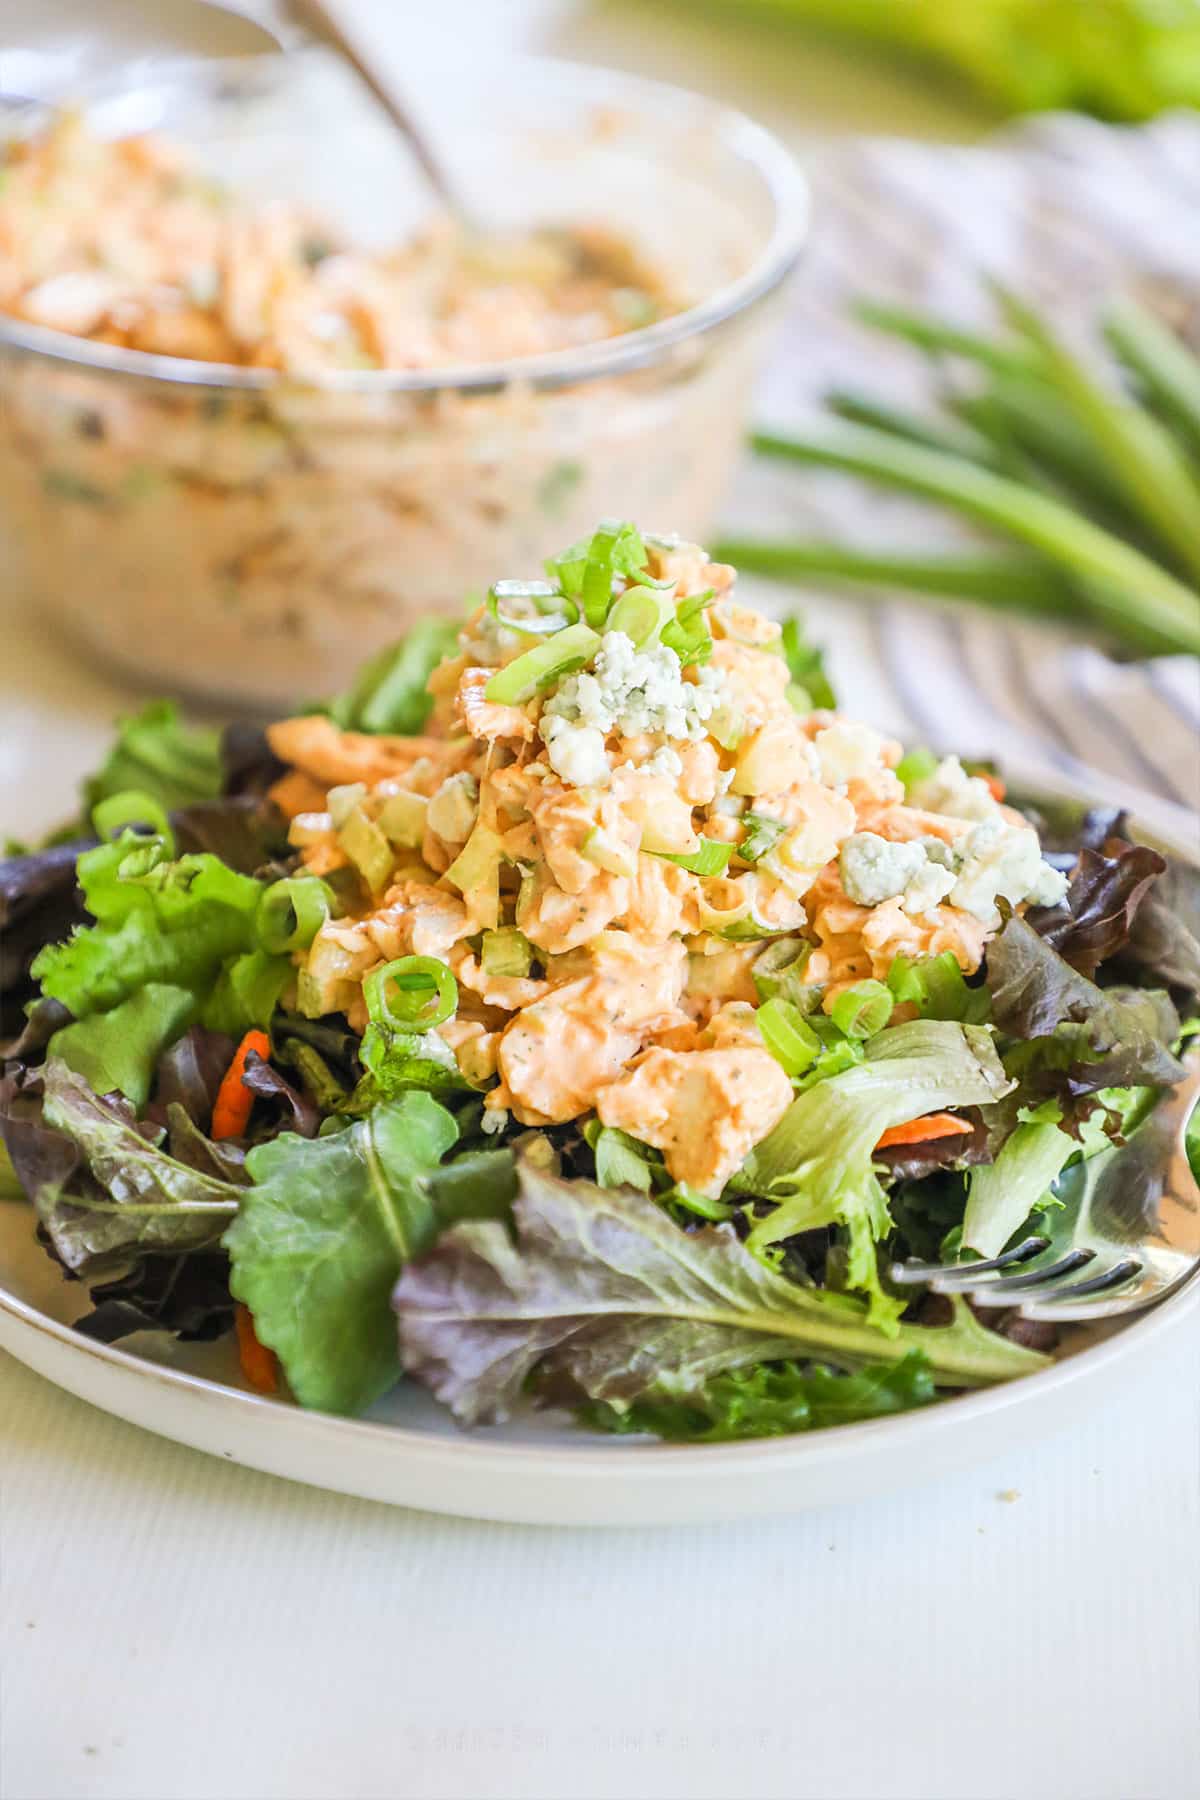 buffalo chicken salad, topped with blue cheese crumbles